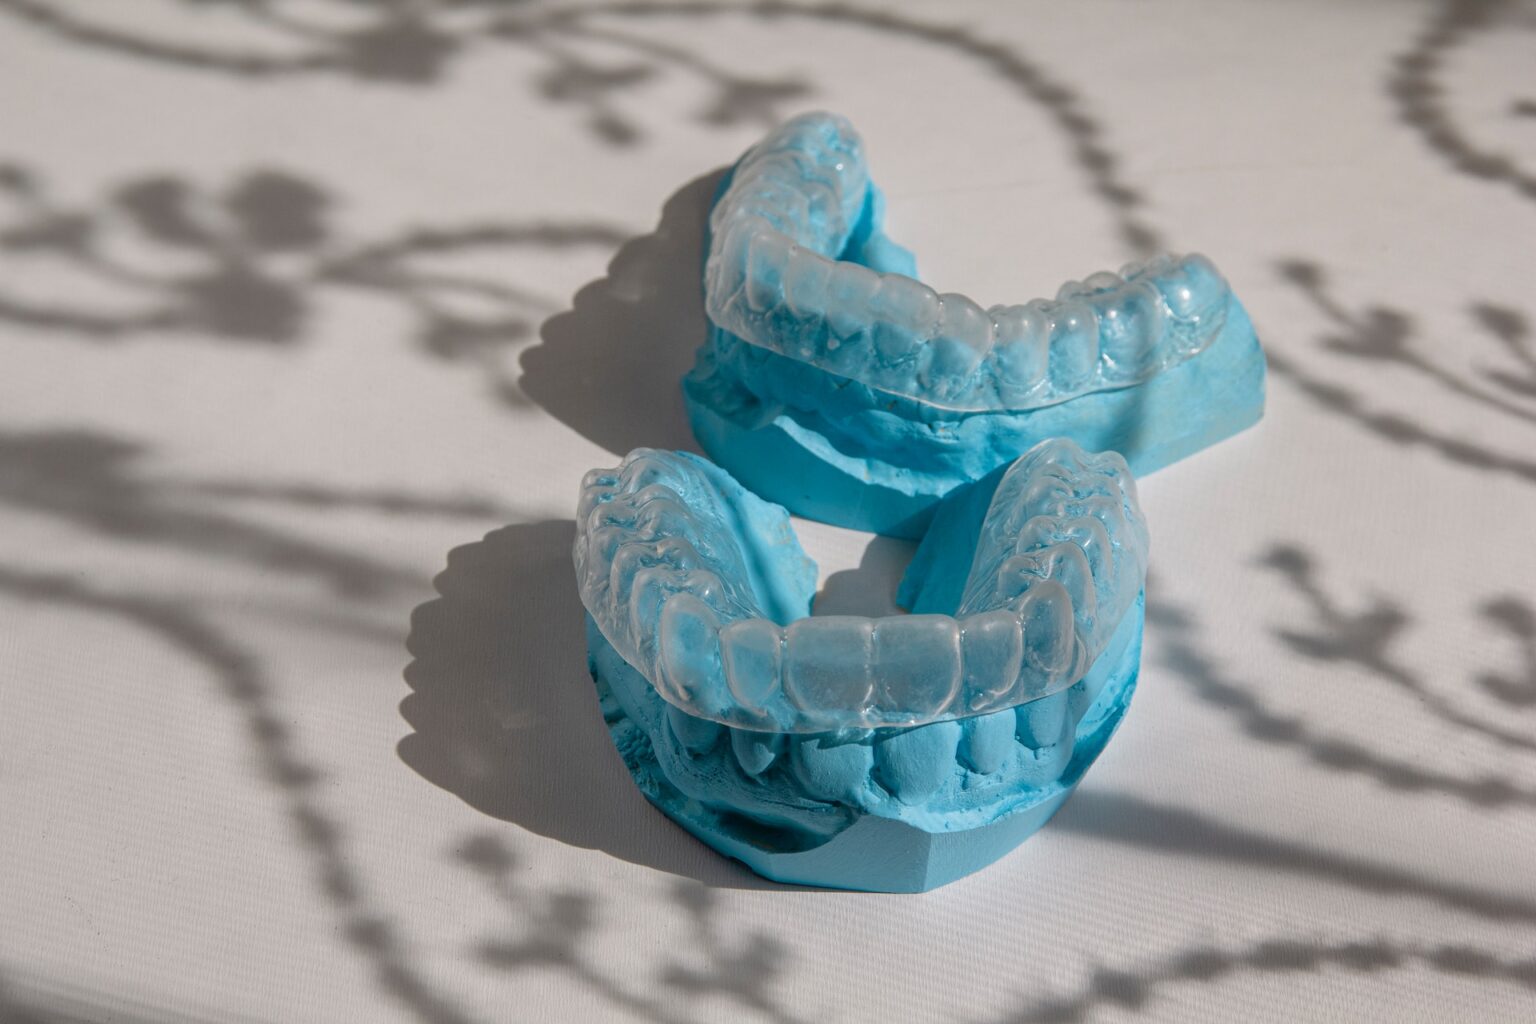 Dental impressions on a patterned surface casting shadow in Dallas dentistry.